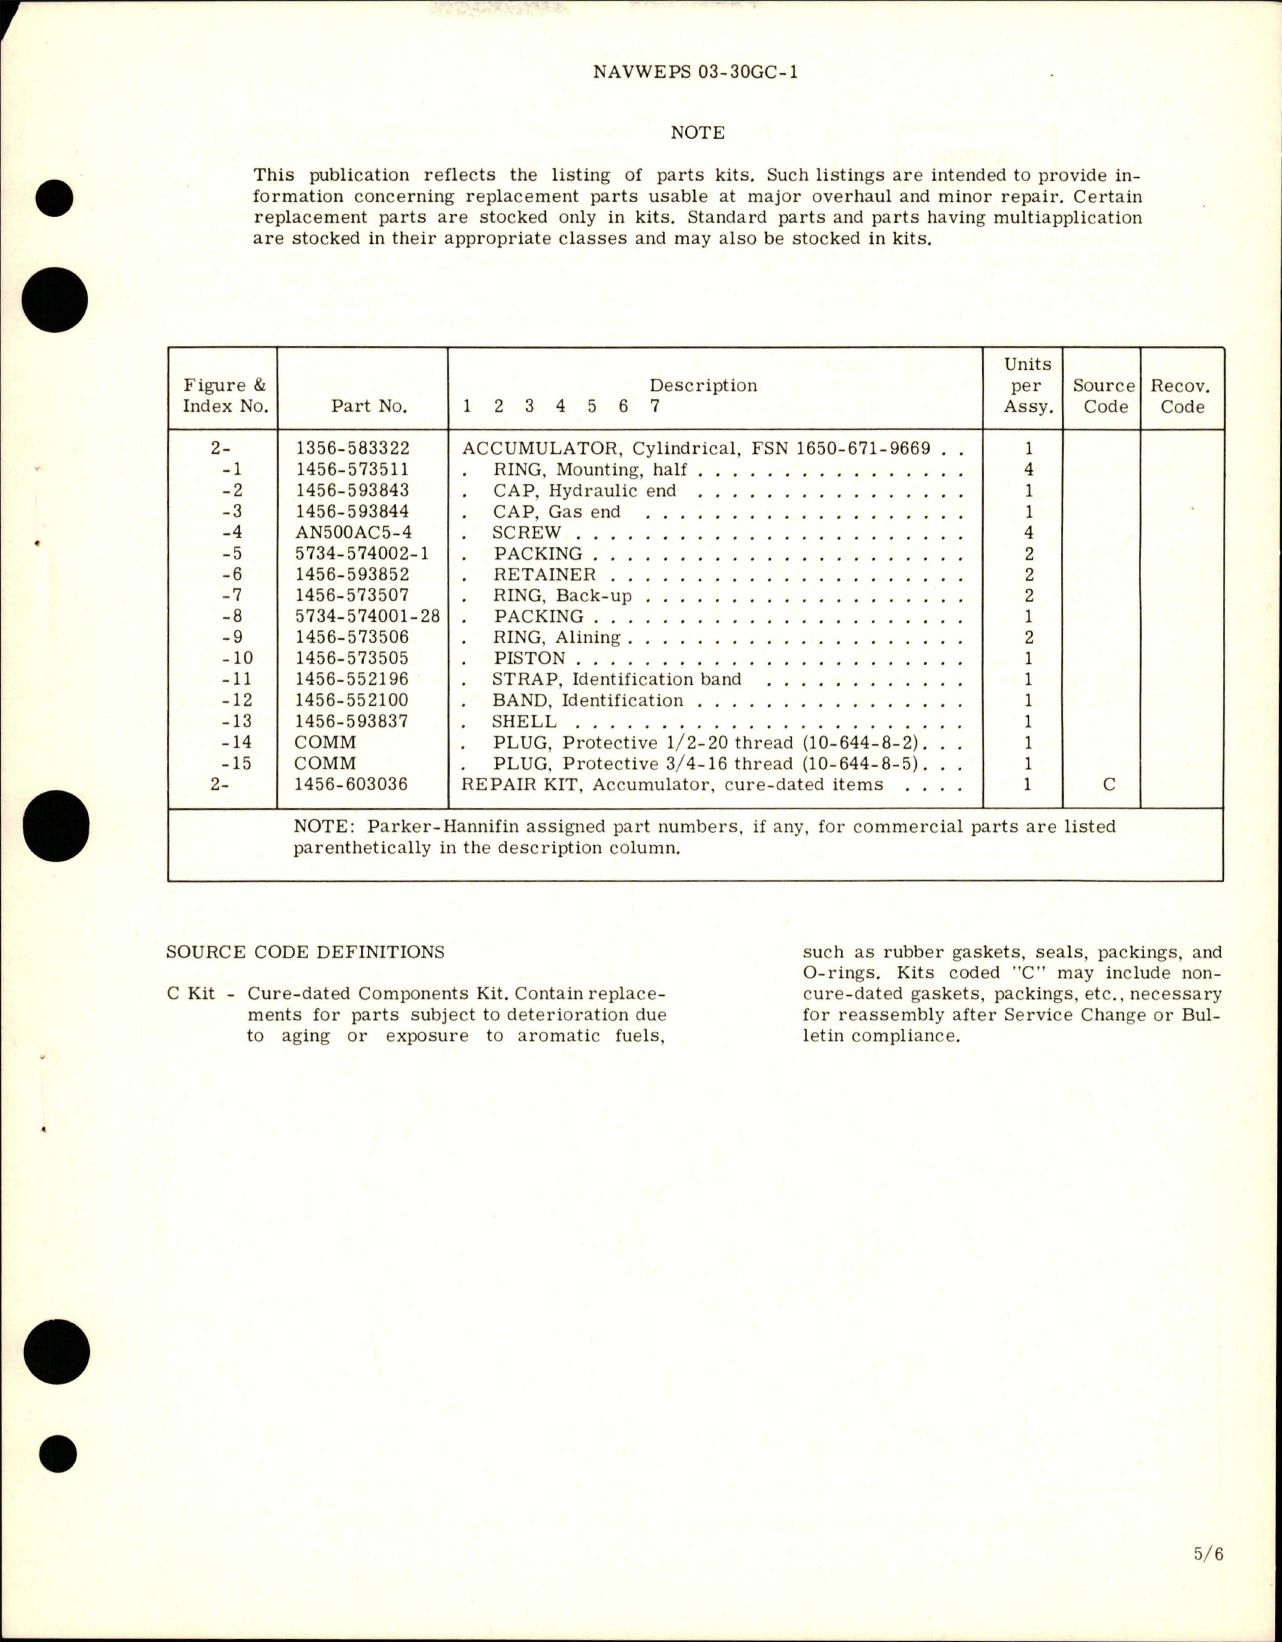 Sample page 5 from AirCorps Library document: Overhaul Instructions with Parts Breakdown for Cylindrical Accumulator - Part 1356-583322 